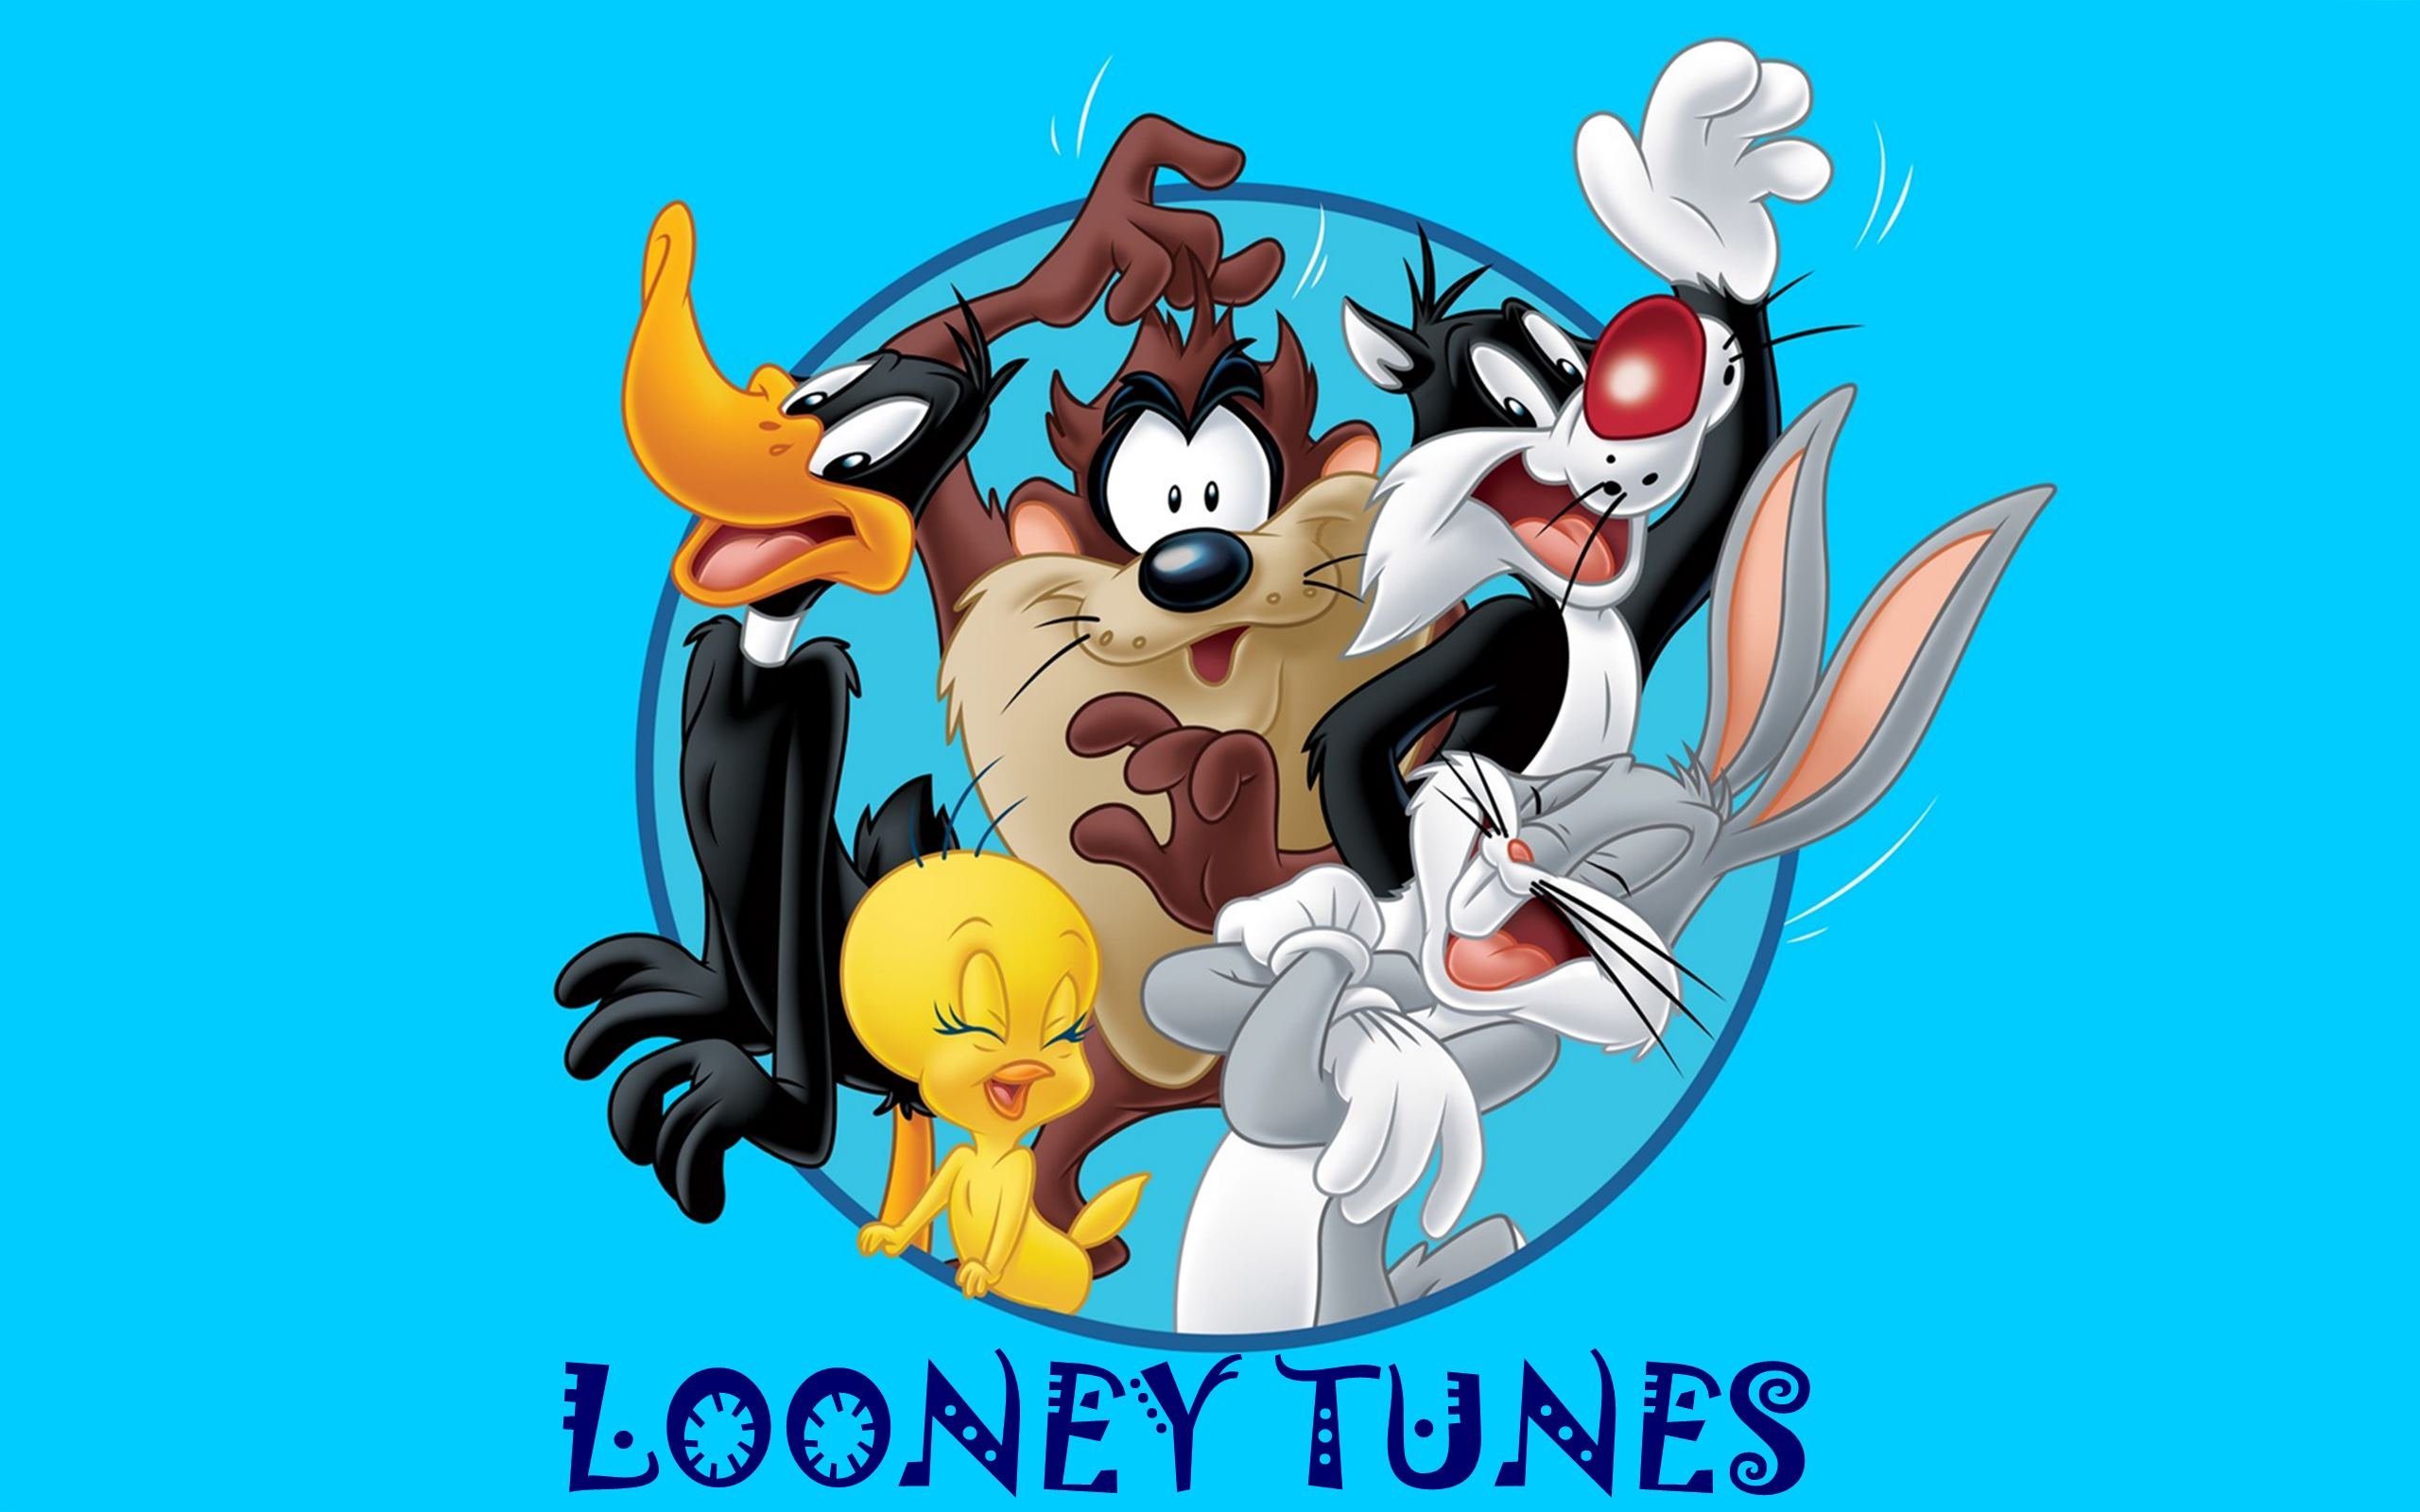 looney, Tunes, Humor, Funny, Cartoon, Family, Merrie, Melodies, Poster